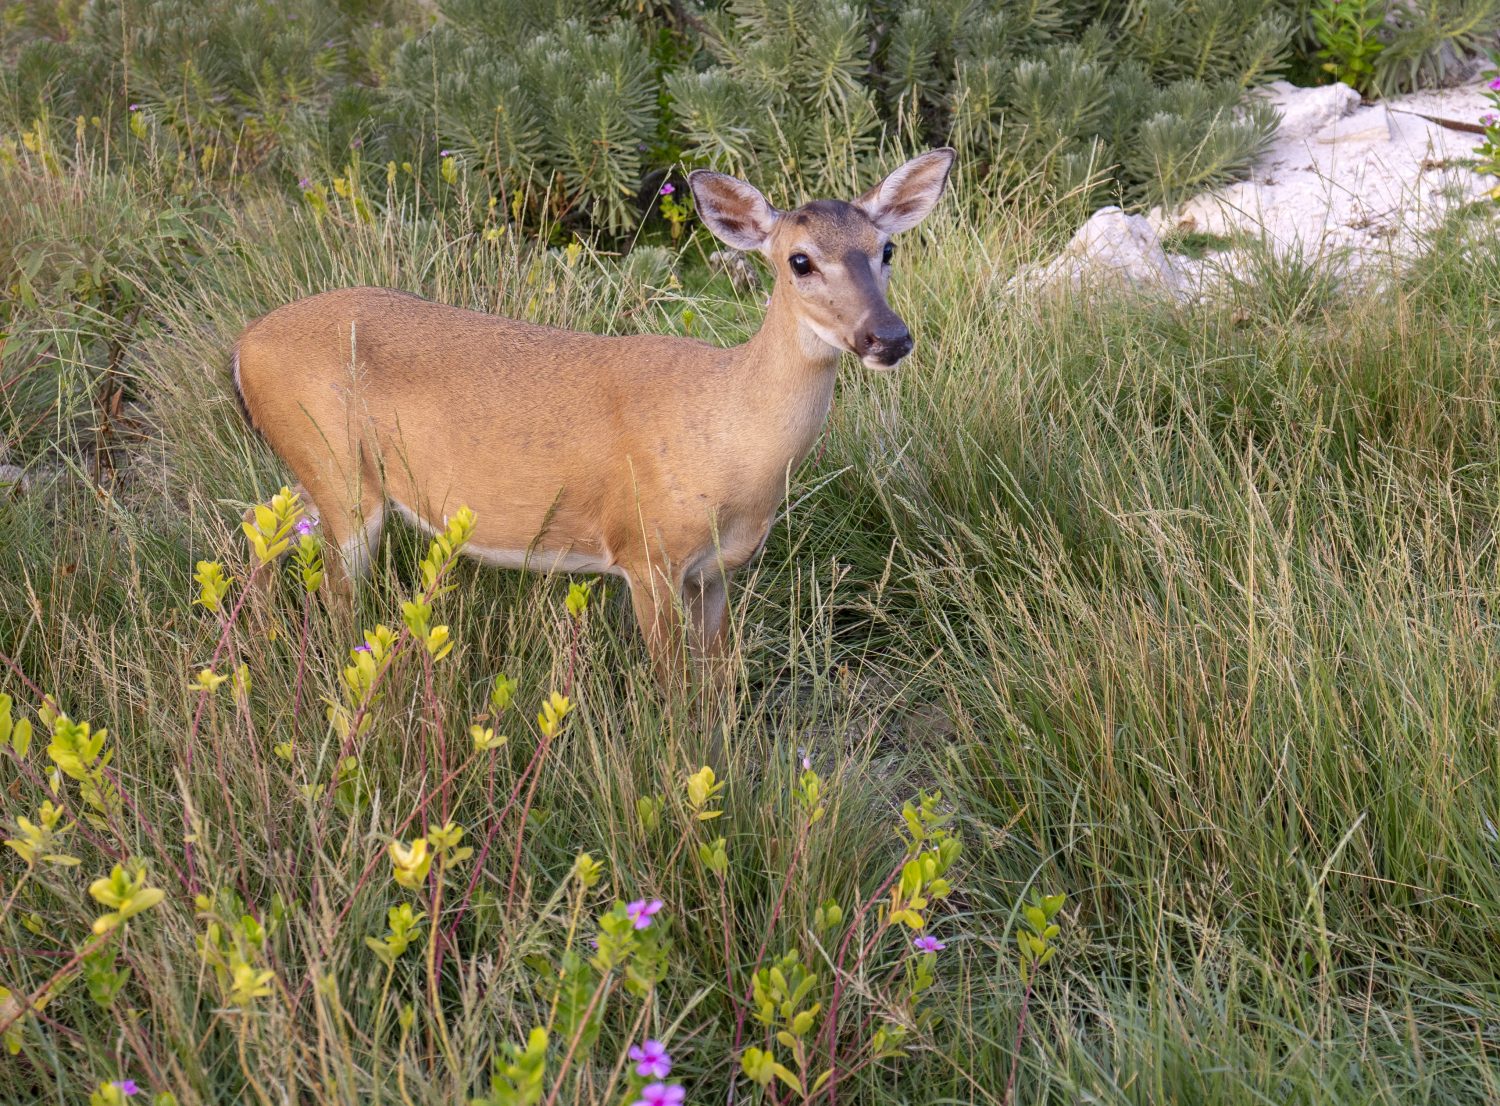 A deer stopped in a field of grass and flowers.